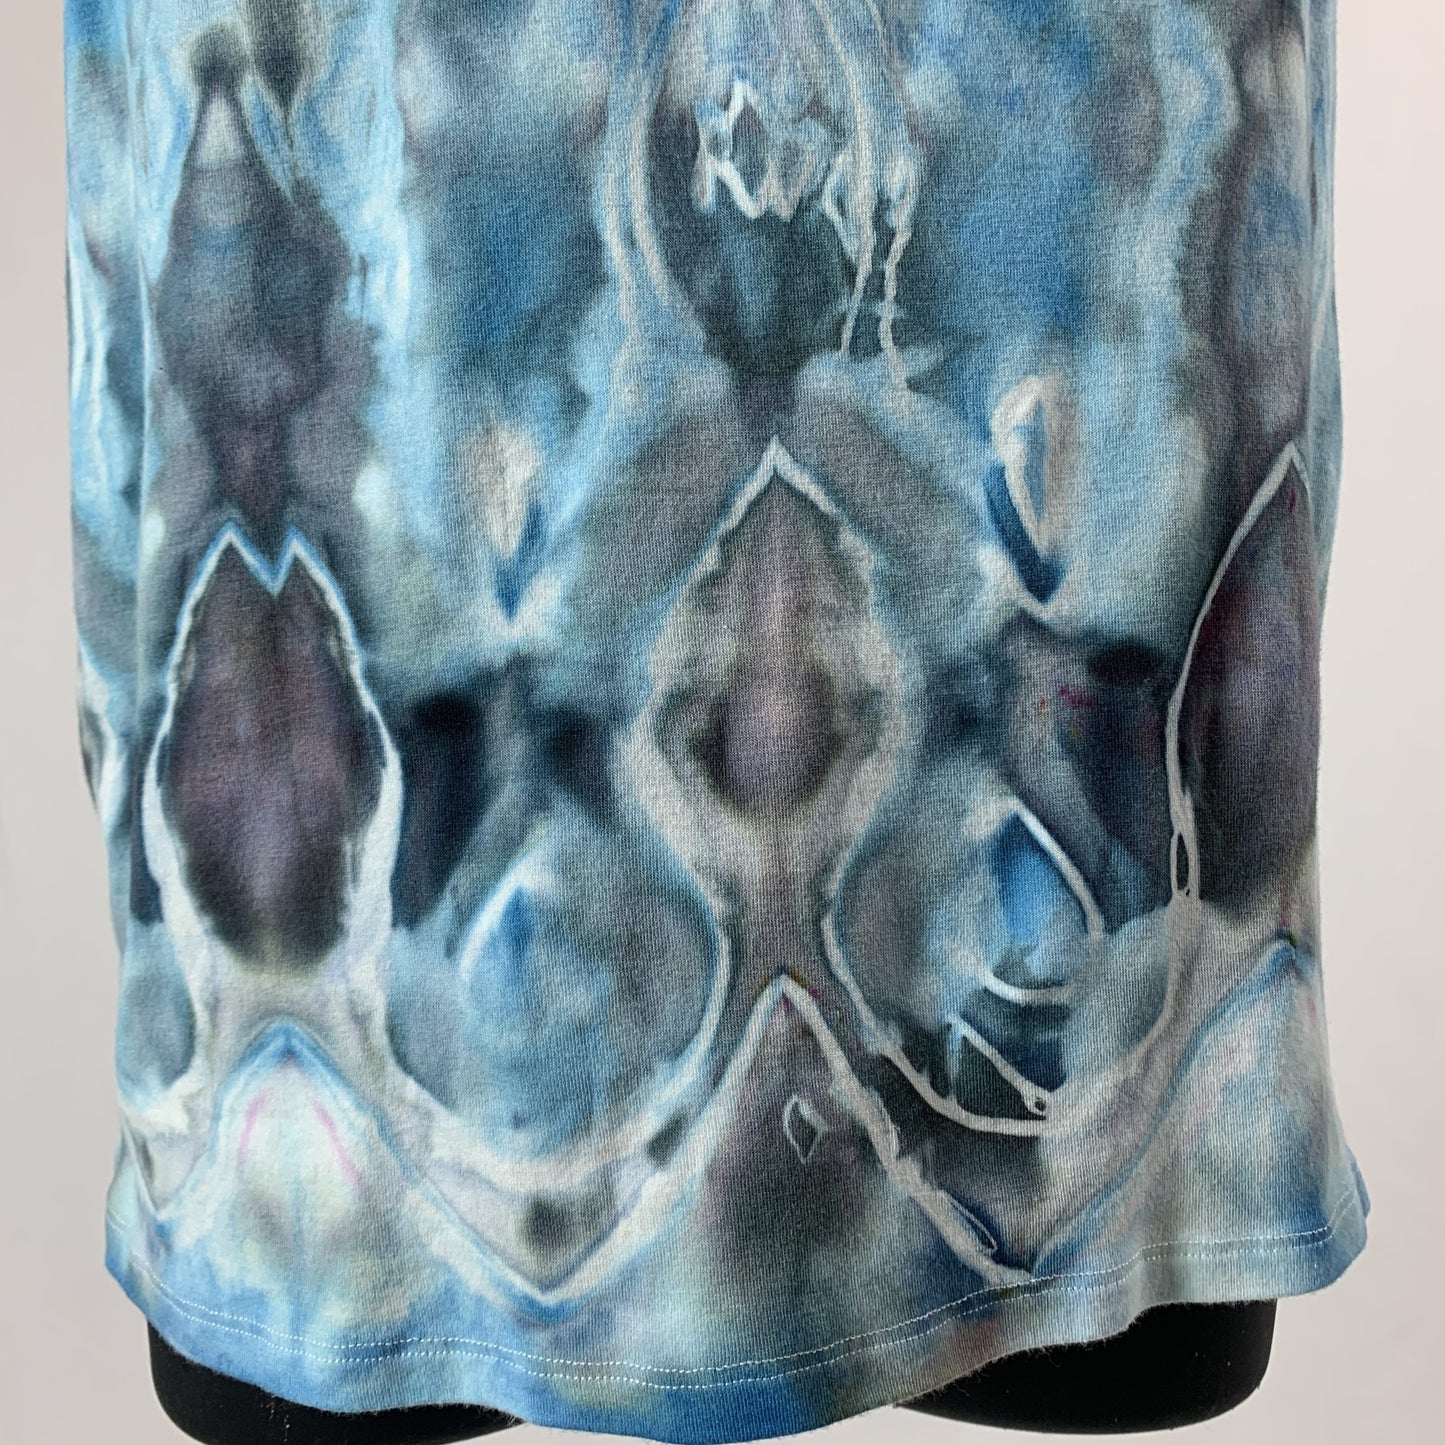 Black and Blue Ice | Tank top t-Shirt | 32+" chest